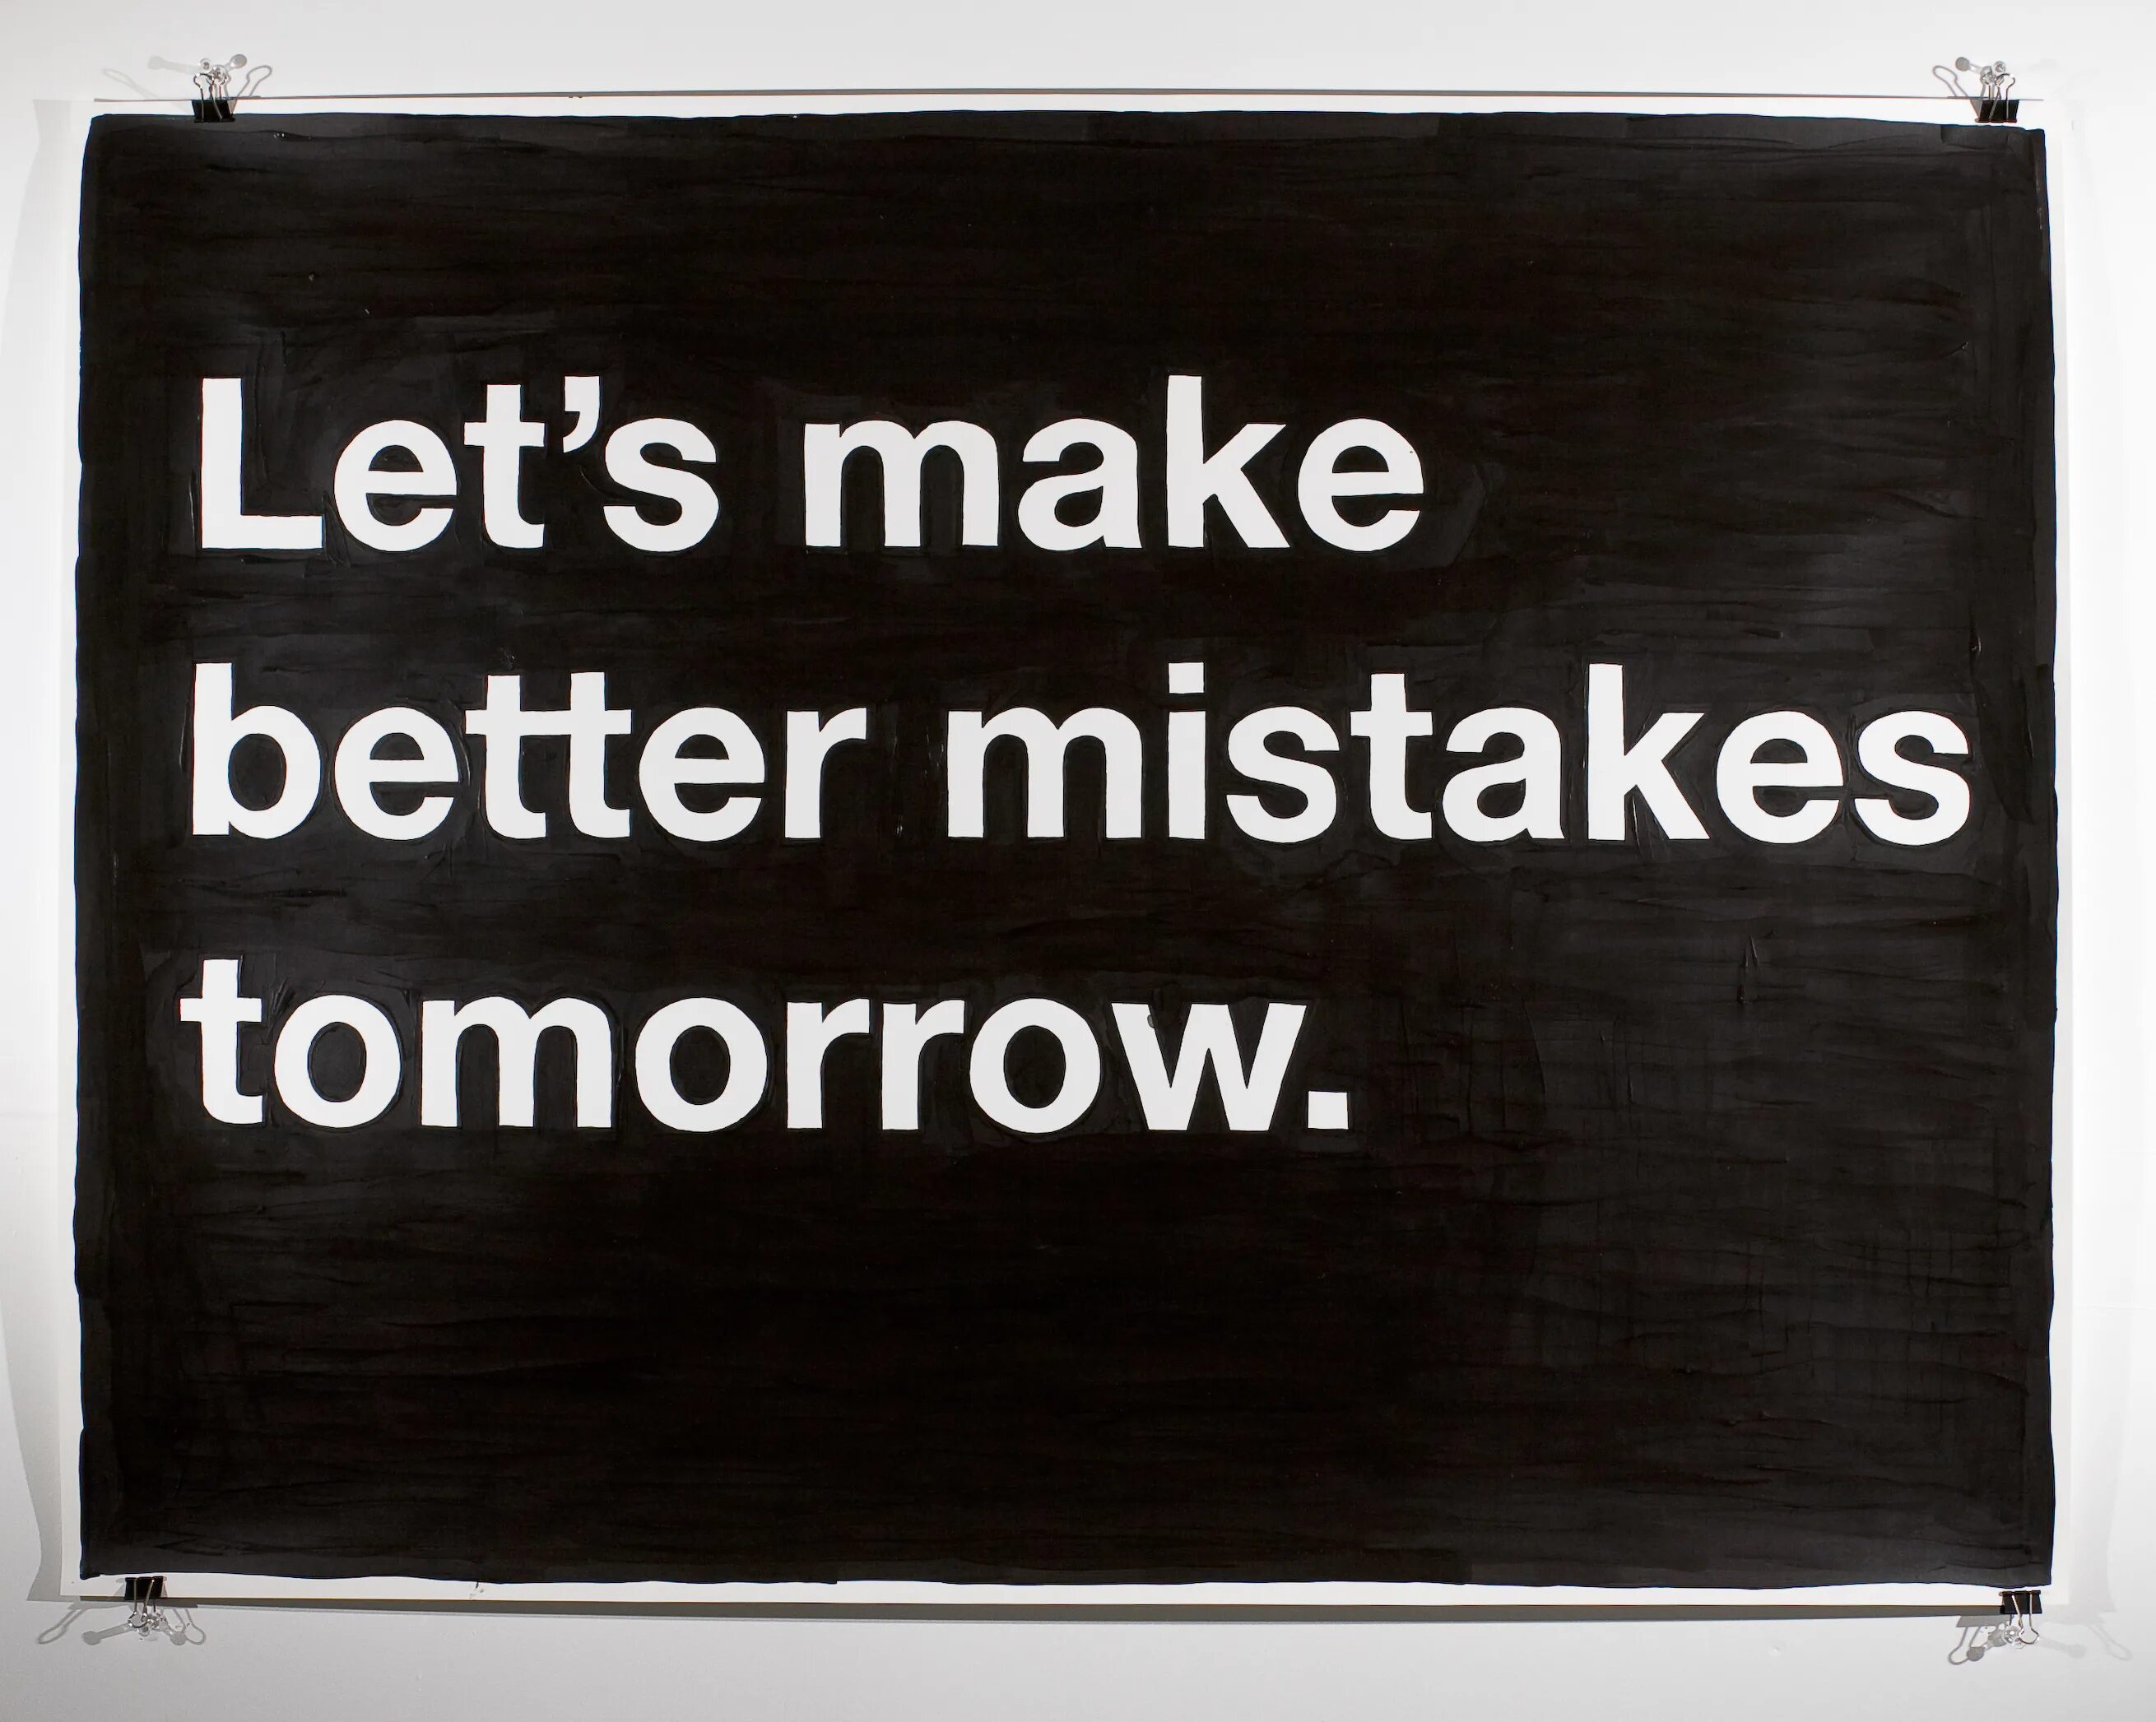 Quotes about mistakes. Lets make better mistakes tomorrow. The mistake надпись. Good mistake обложка. Make mistake good